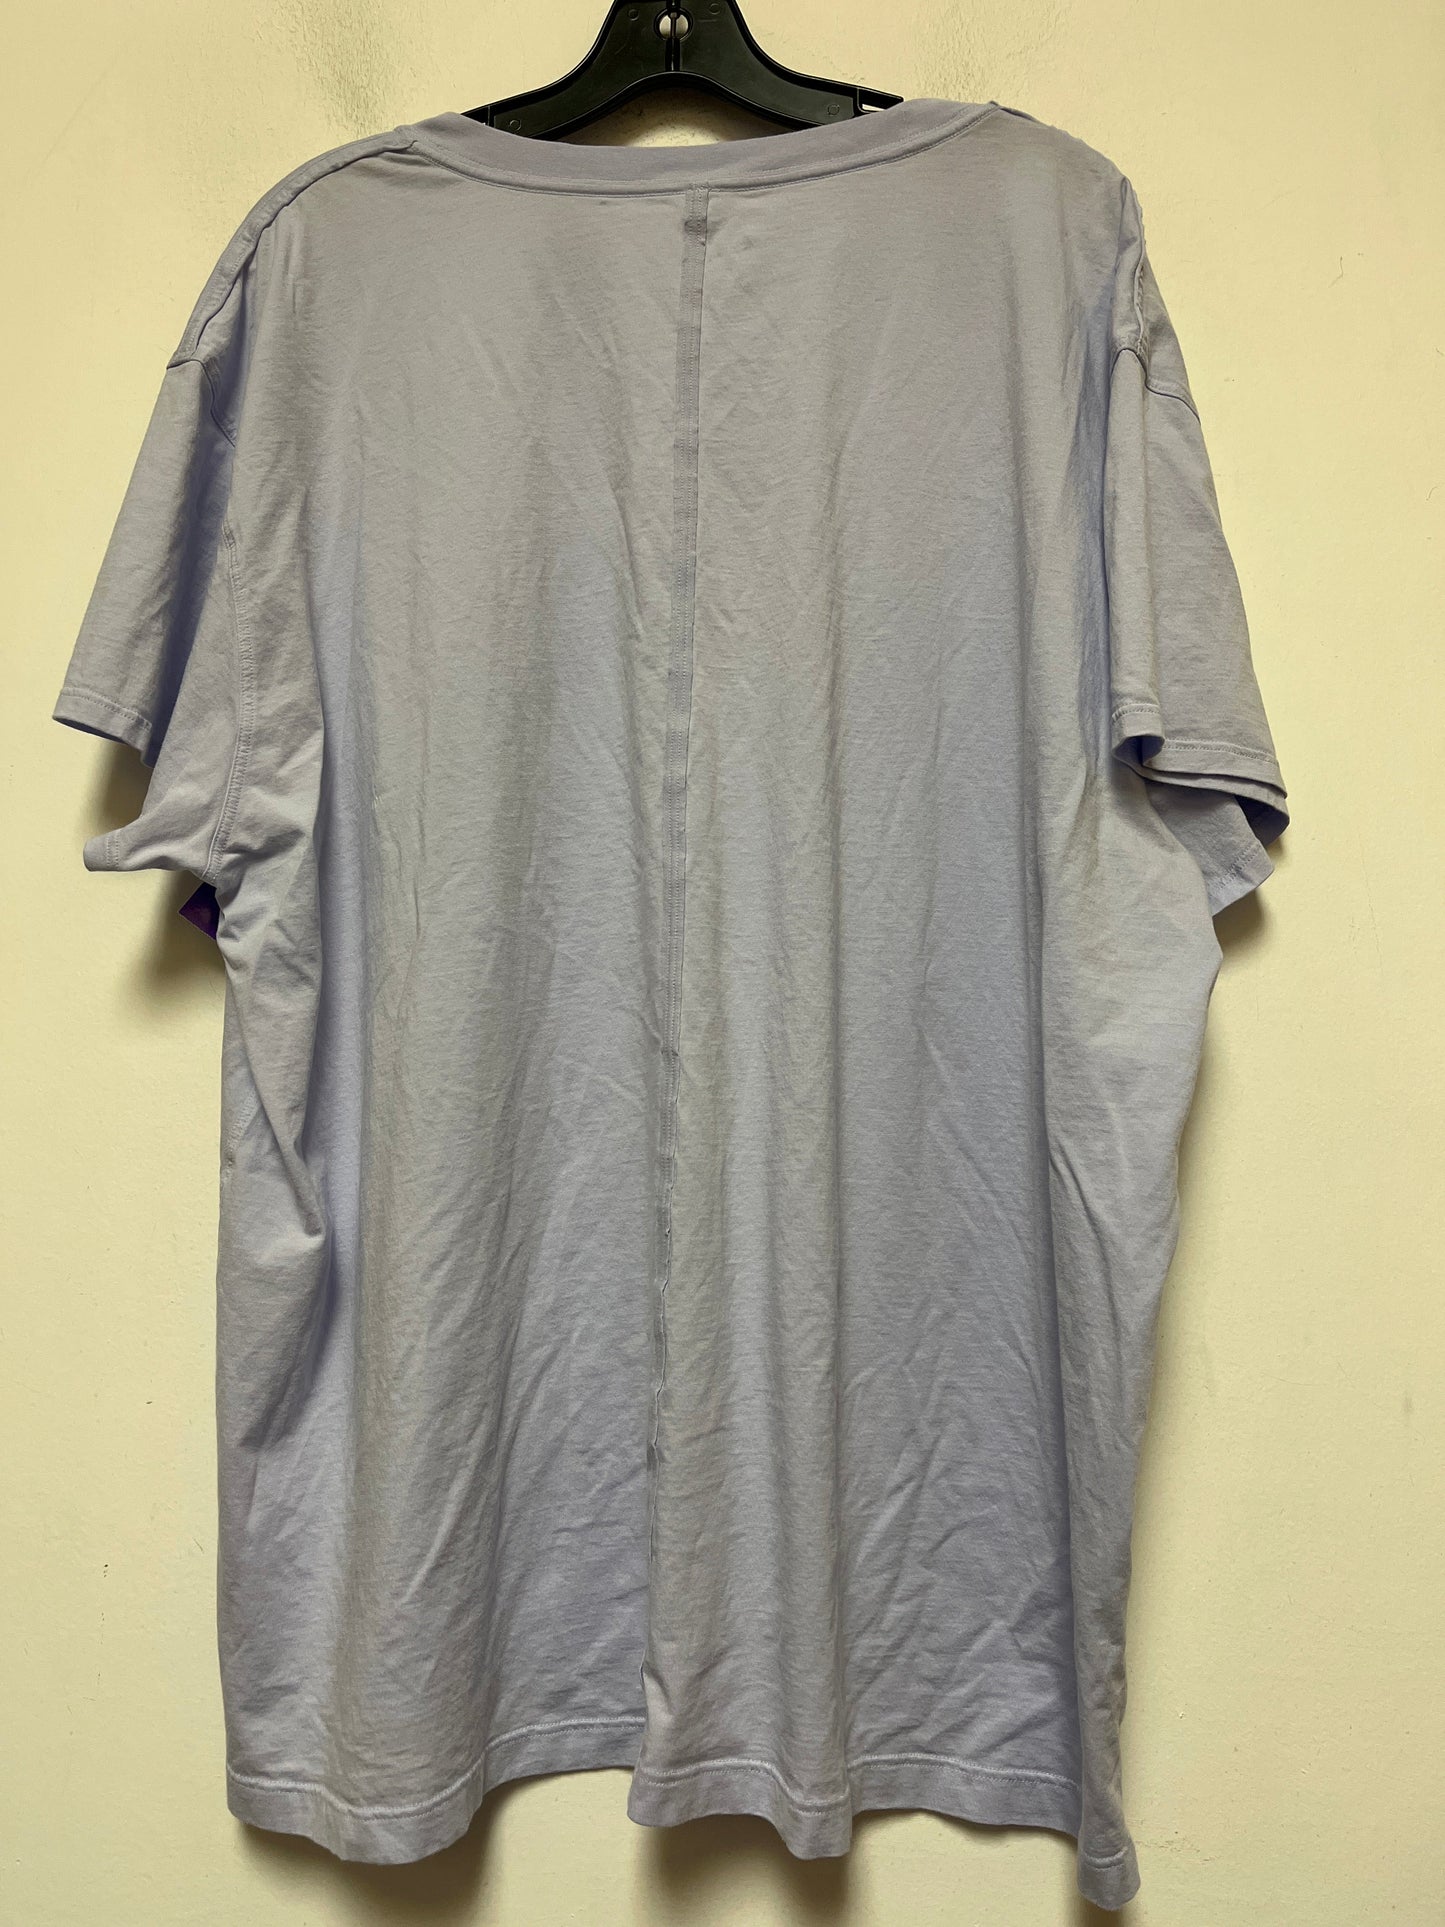 Athletic Top Short Sleeve By Lululemon  Size: 2x